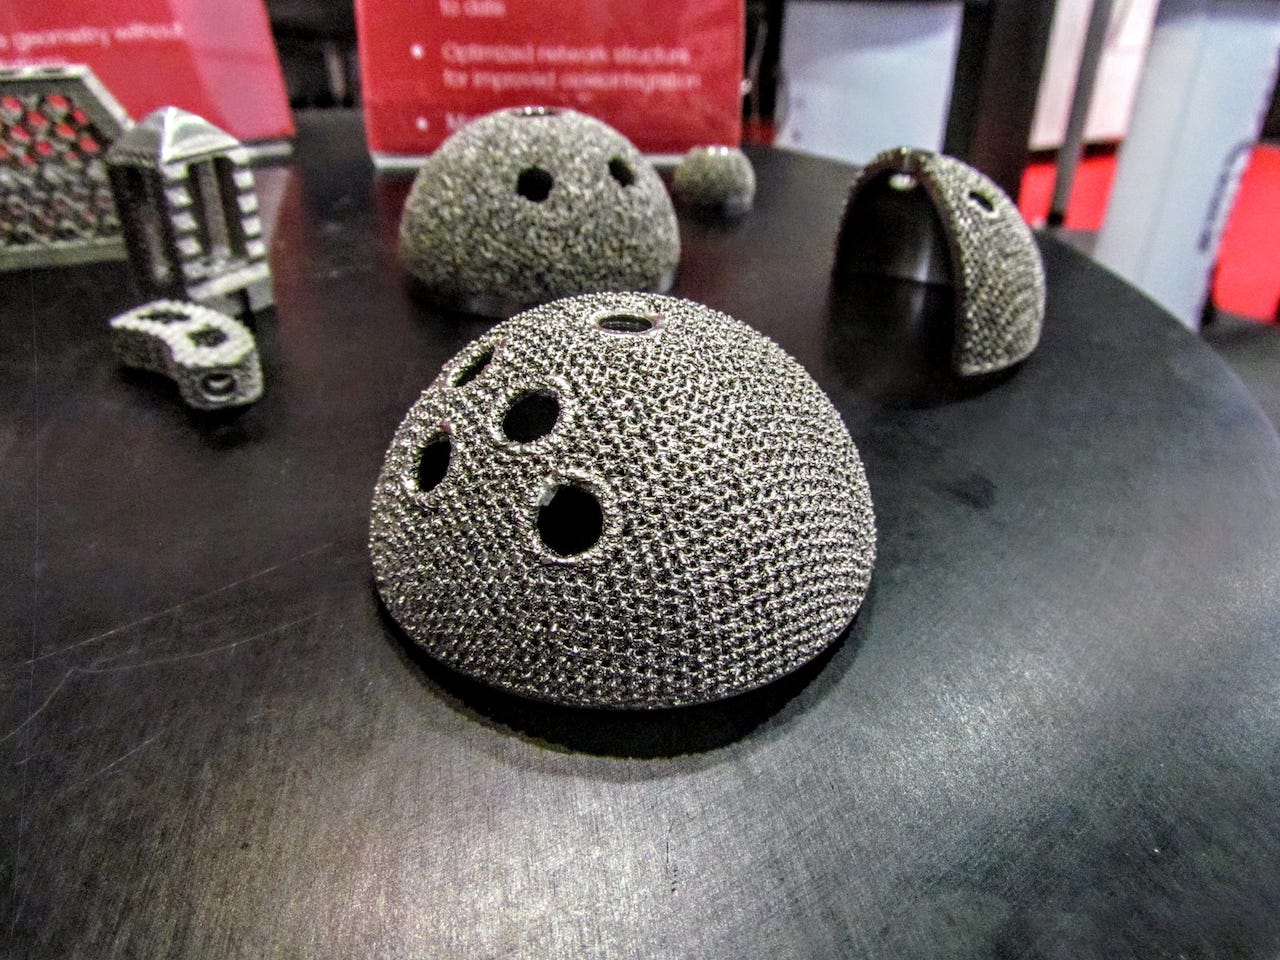  A 3D printed hip joint made by Arcam 